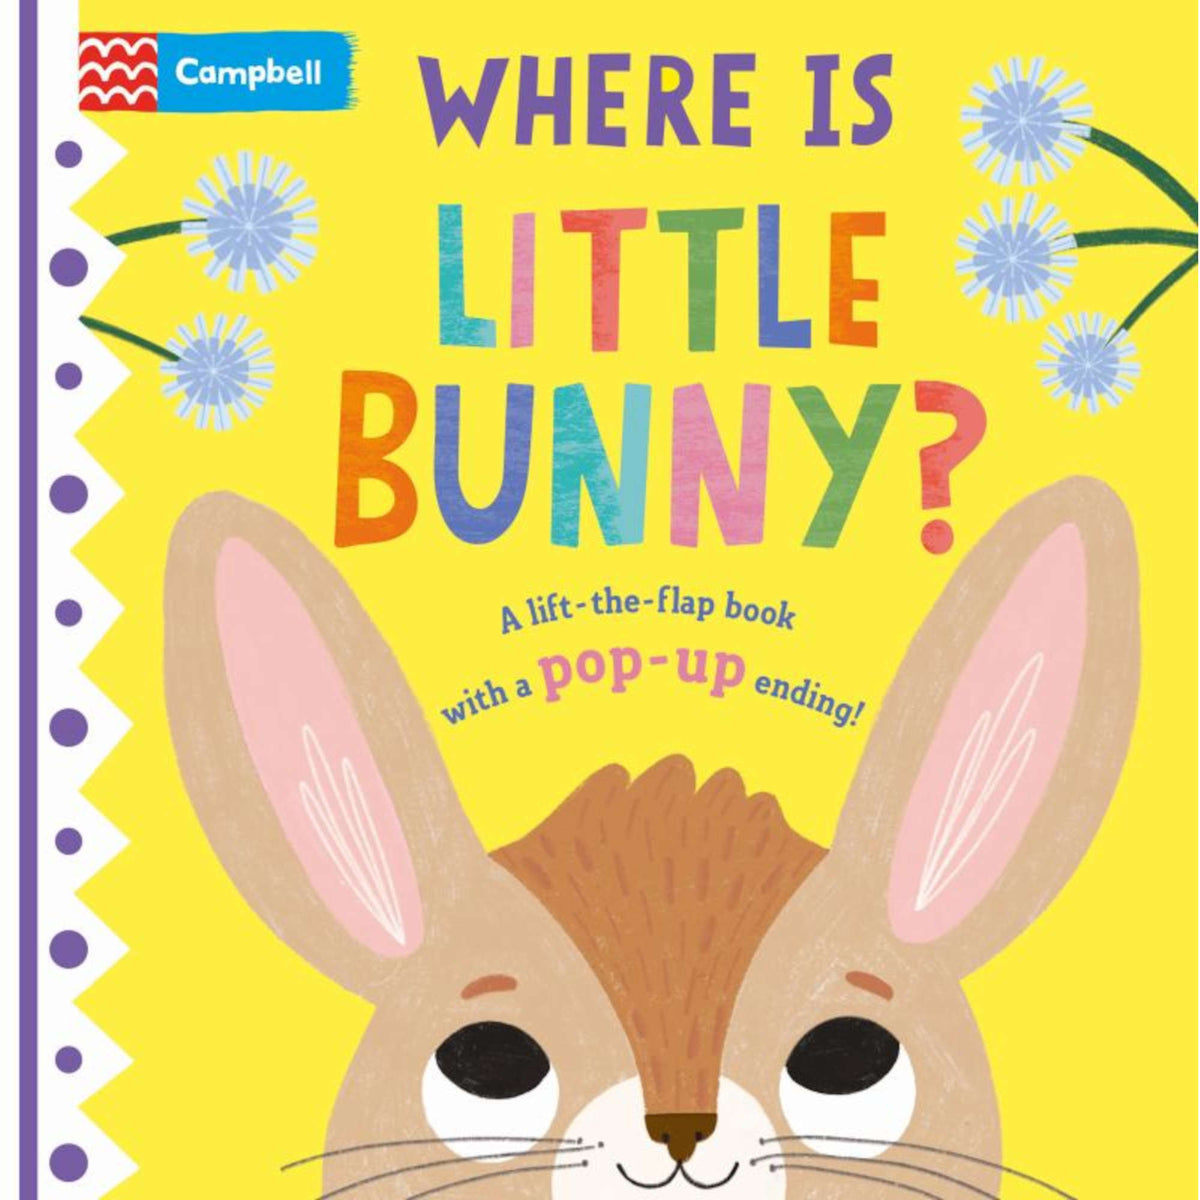 Where is Little Bunny? : The lift-the-flap book with a pop-up ending!